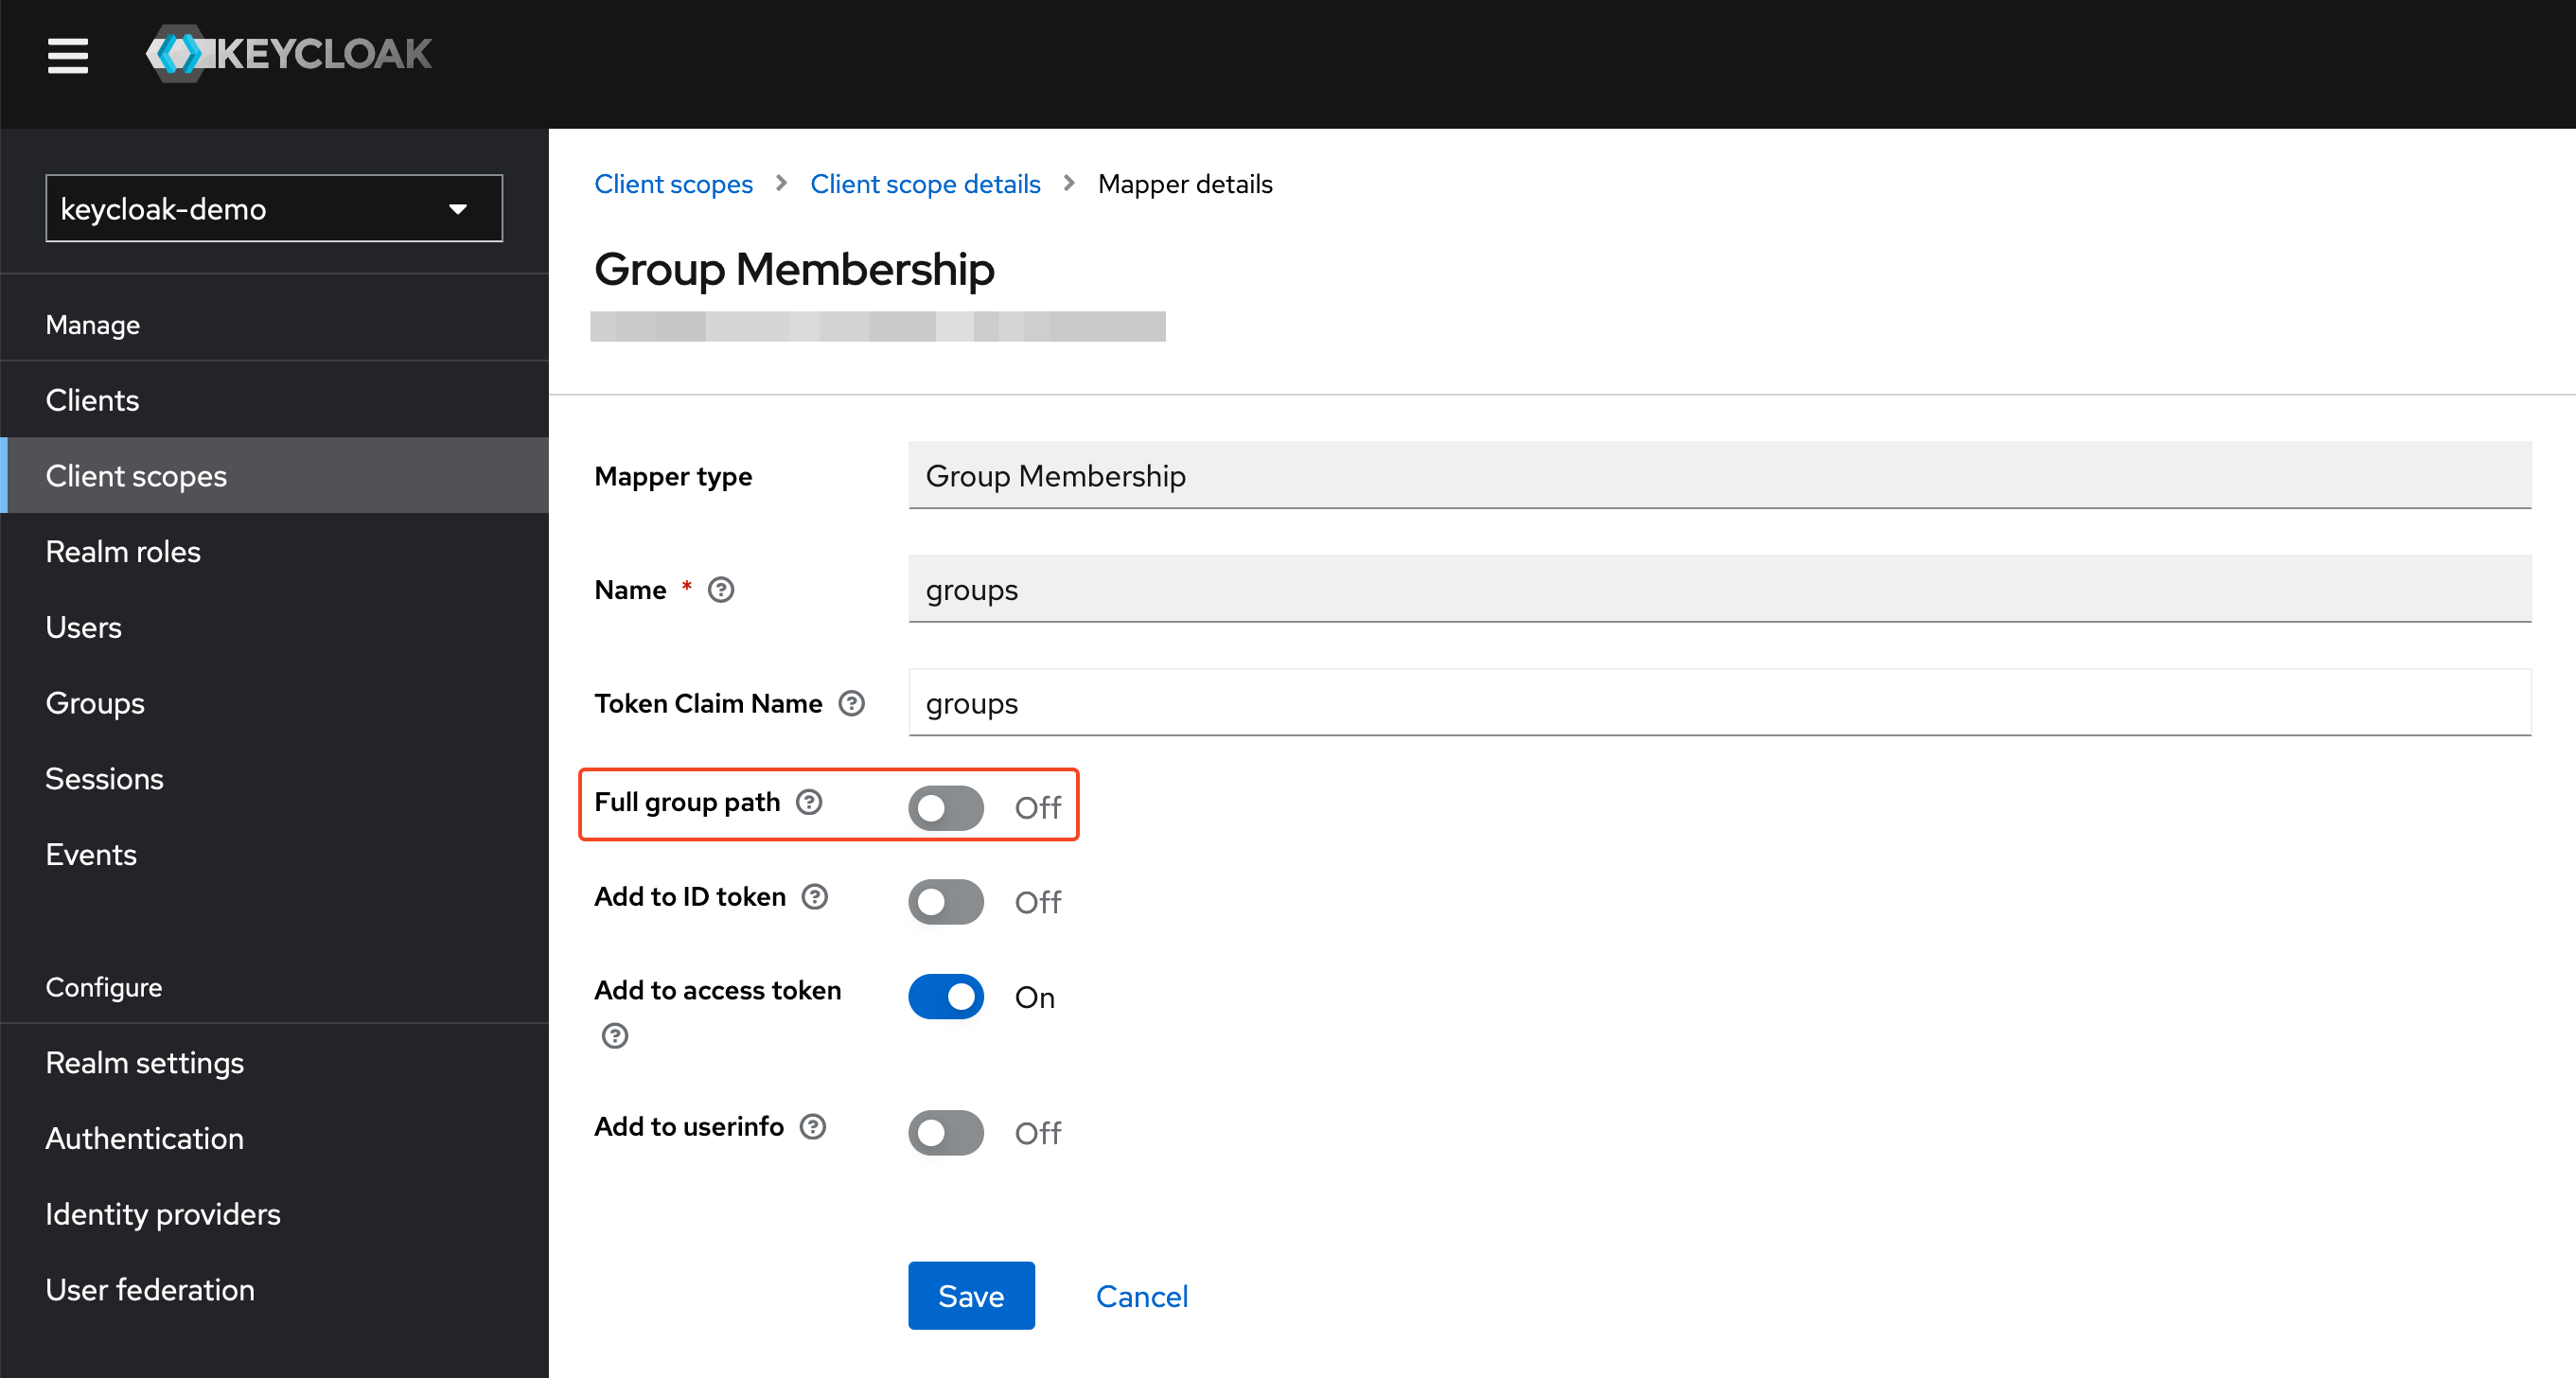 Disable full group path setting